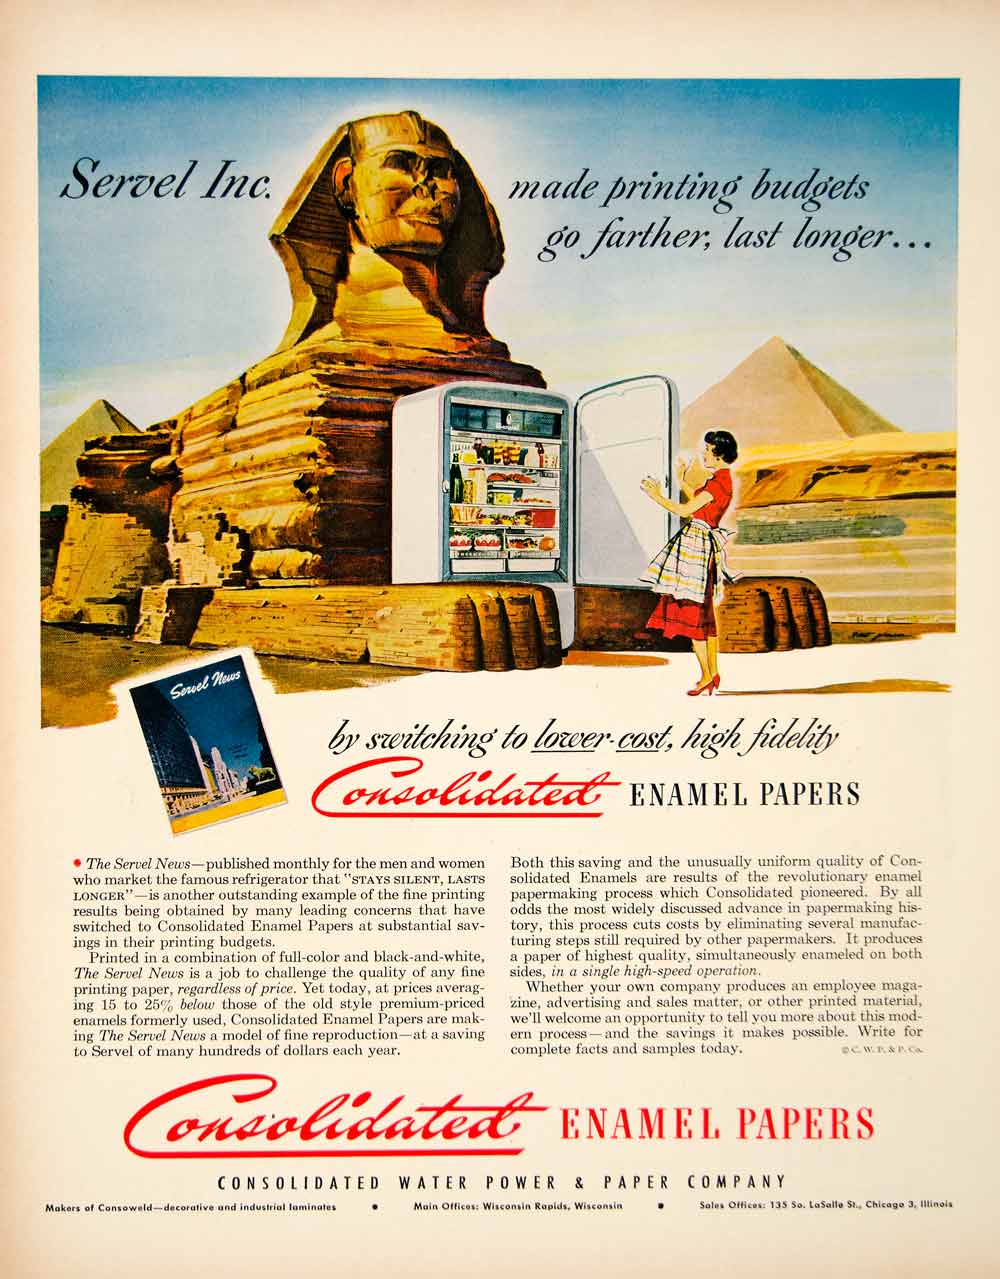 1950 Ad Consolidated Enamel Papers 135 S LaSalle St Chicago Illinois Sphinx YFT5